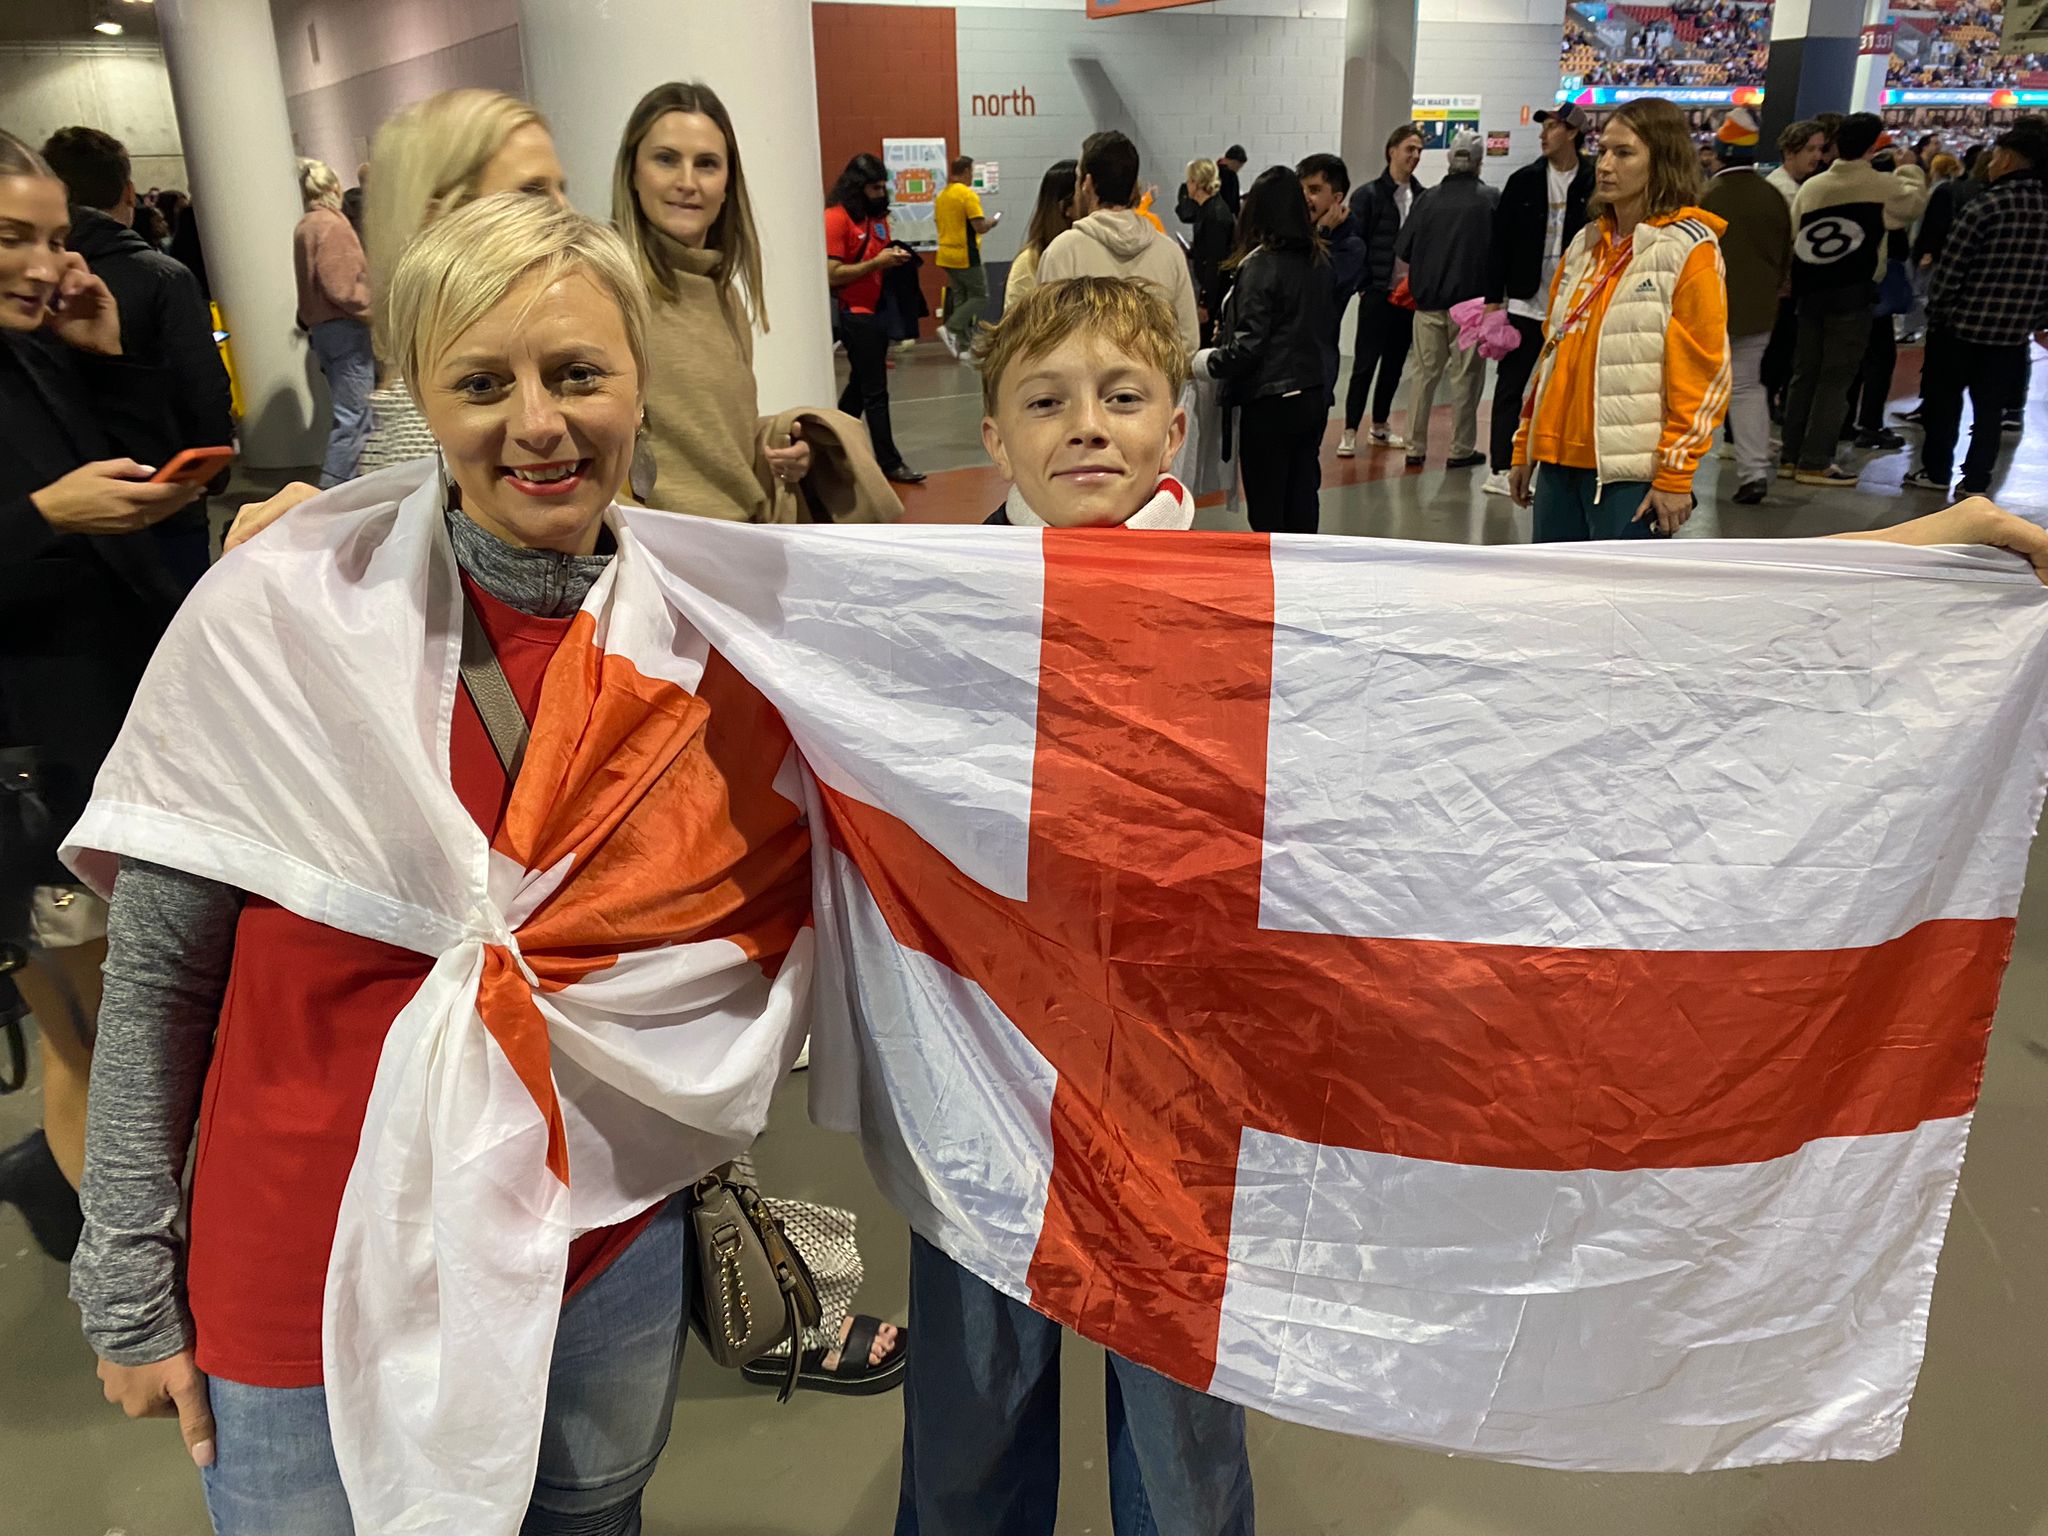 Joanna and Stanley Taylor are hoping for an England win tonight.